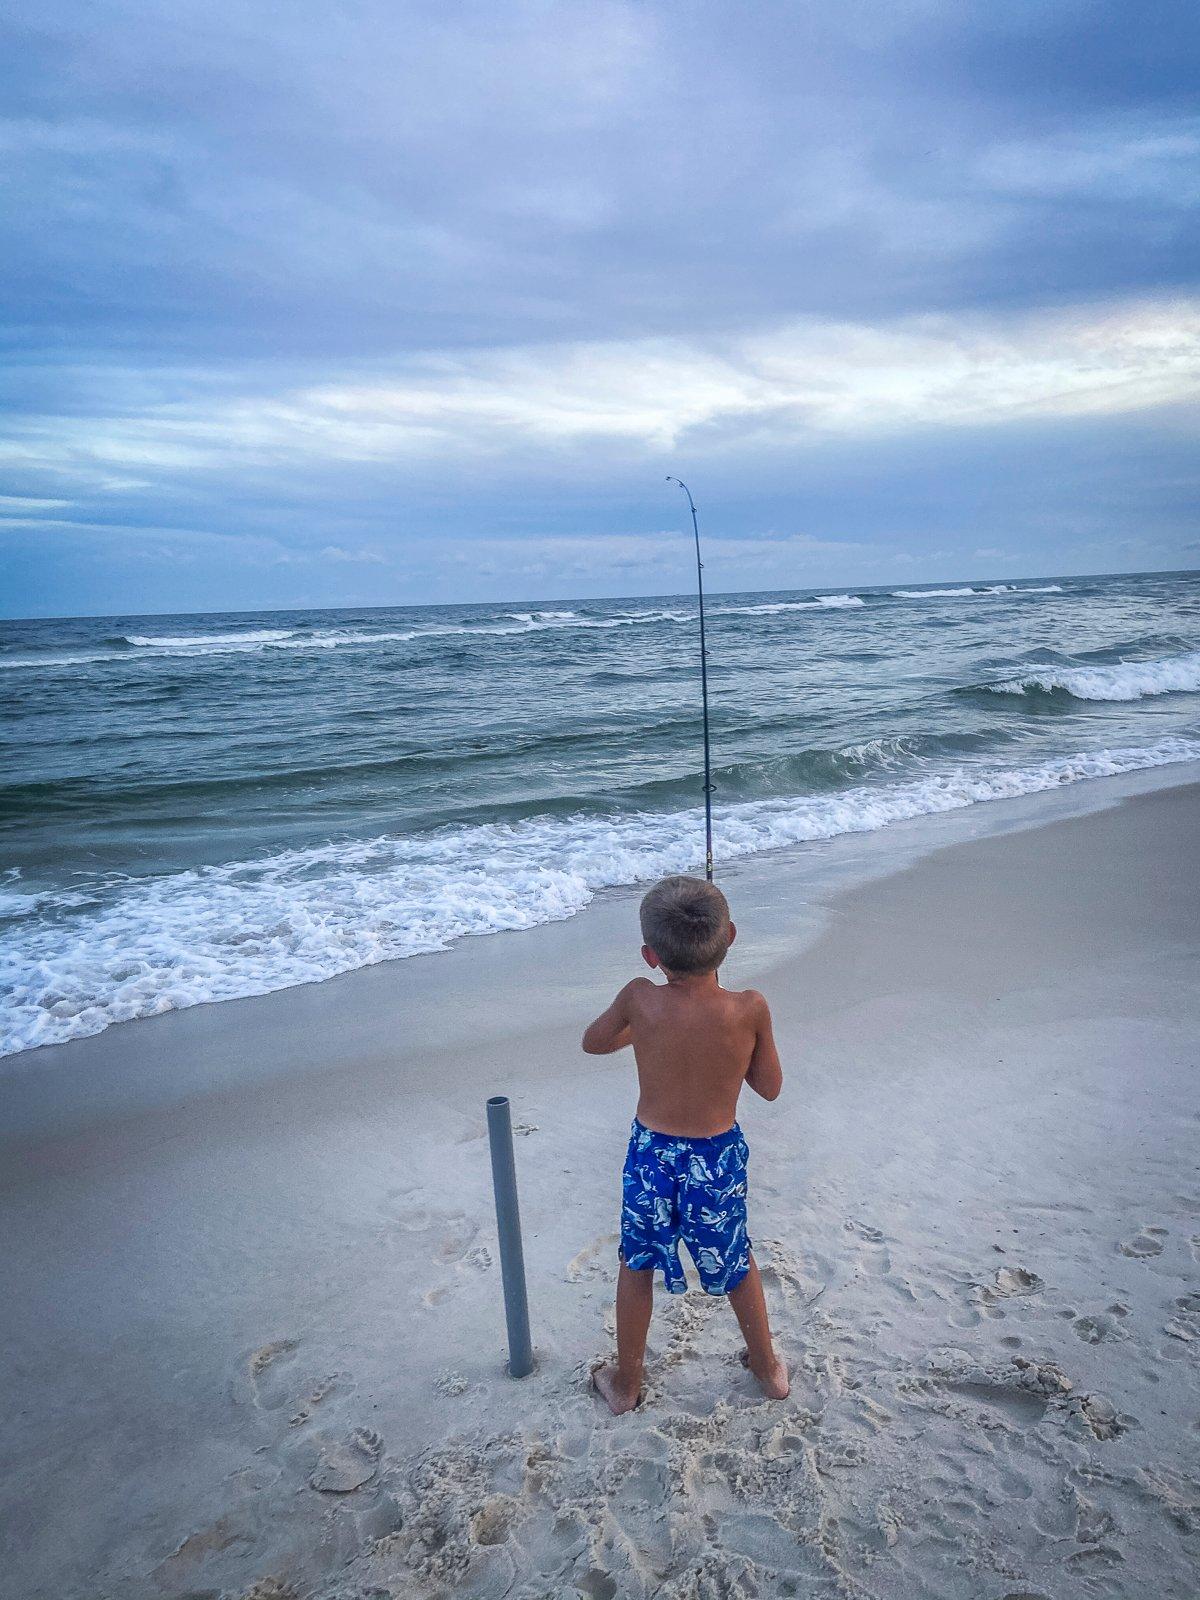 With the right approach, surf fishing provides reliable action and is way more fun than building sand castles. Image by Will Brantley